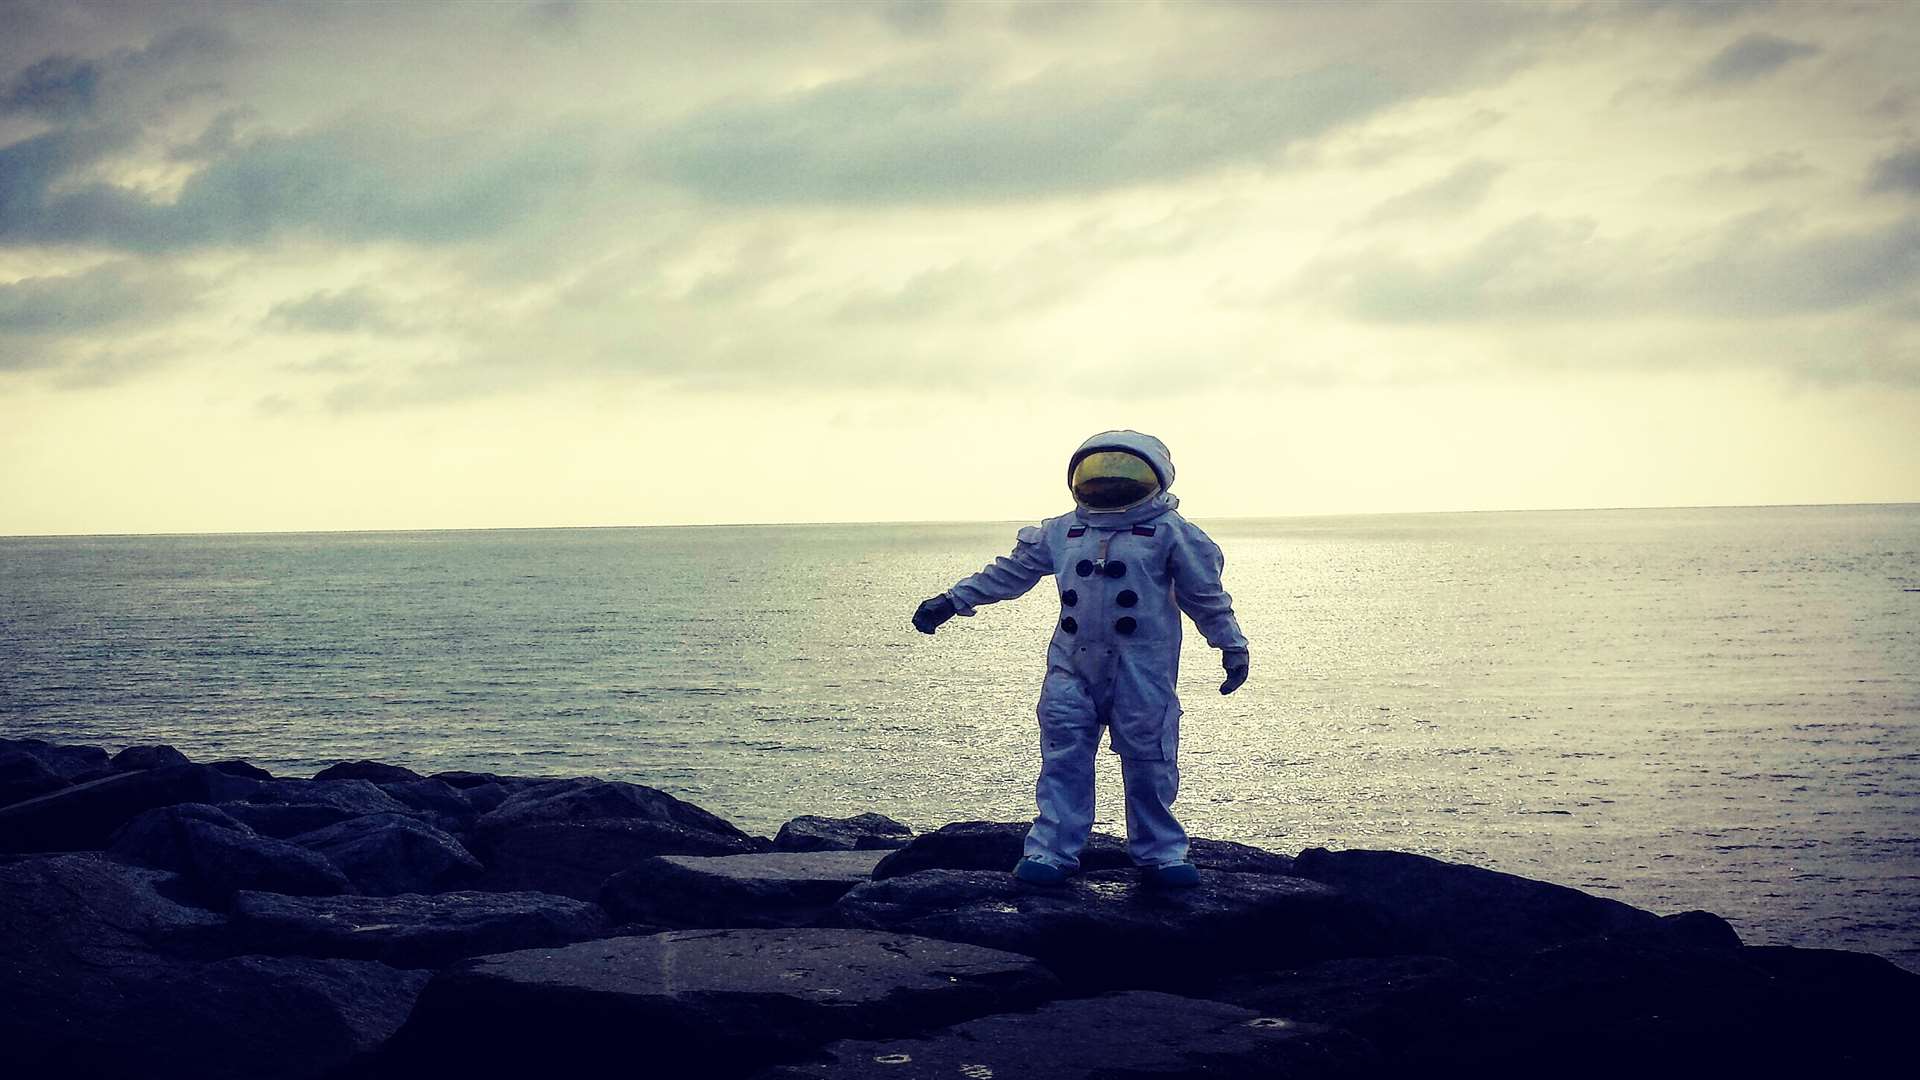 It was one strange sight for Folkestonians when the astronaut was spotted on the beach. Picture: Ben Barton